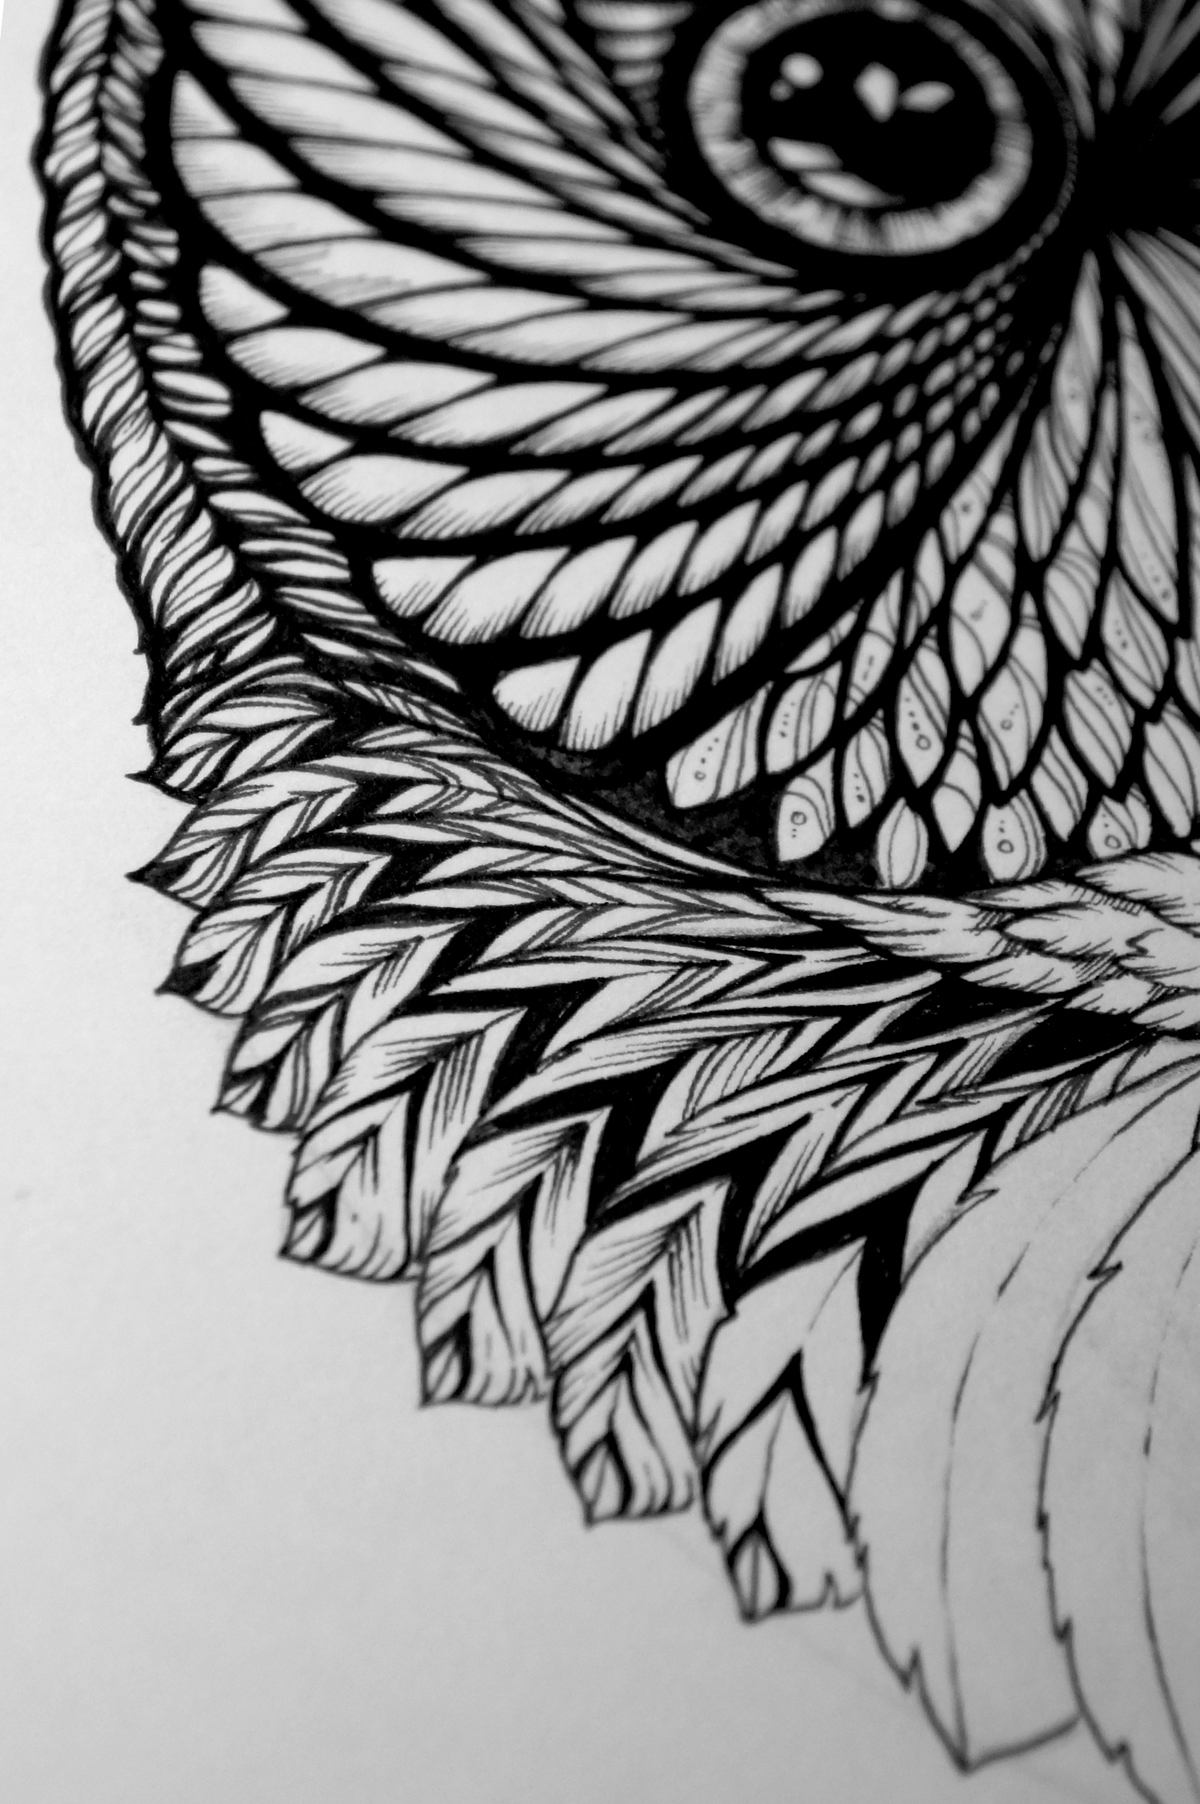 owl hand drawn eyes detail intricate pen black and white illustrating bird animal feathers pattern stripes ears